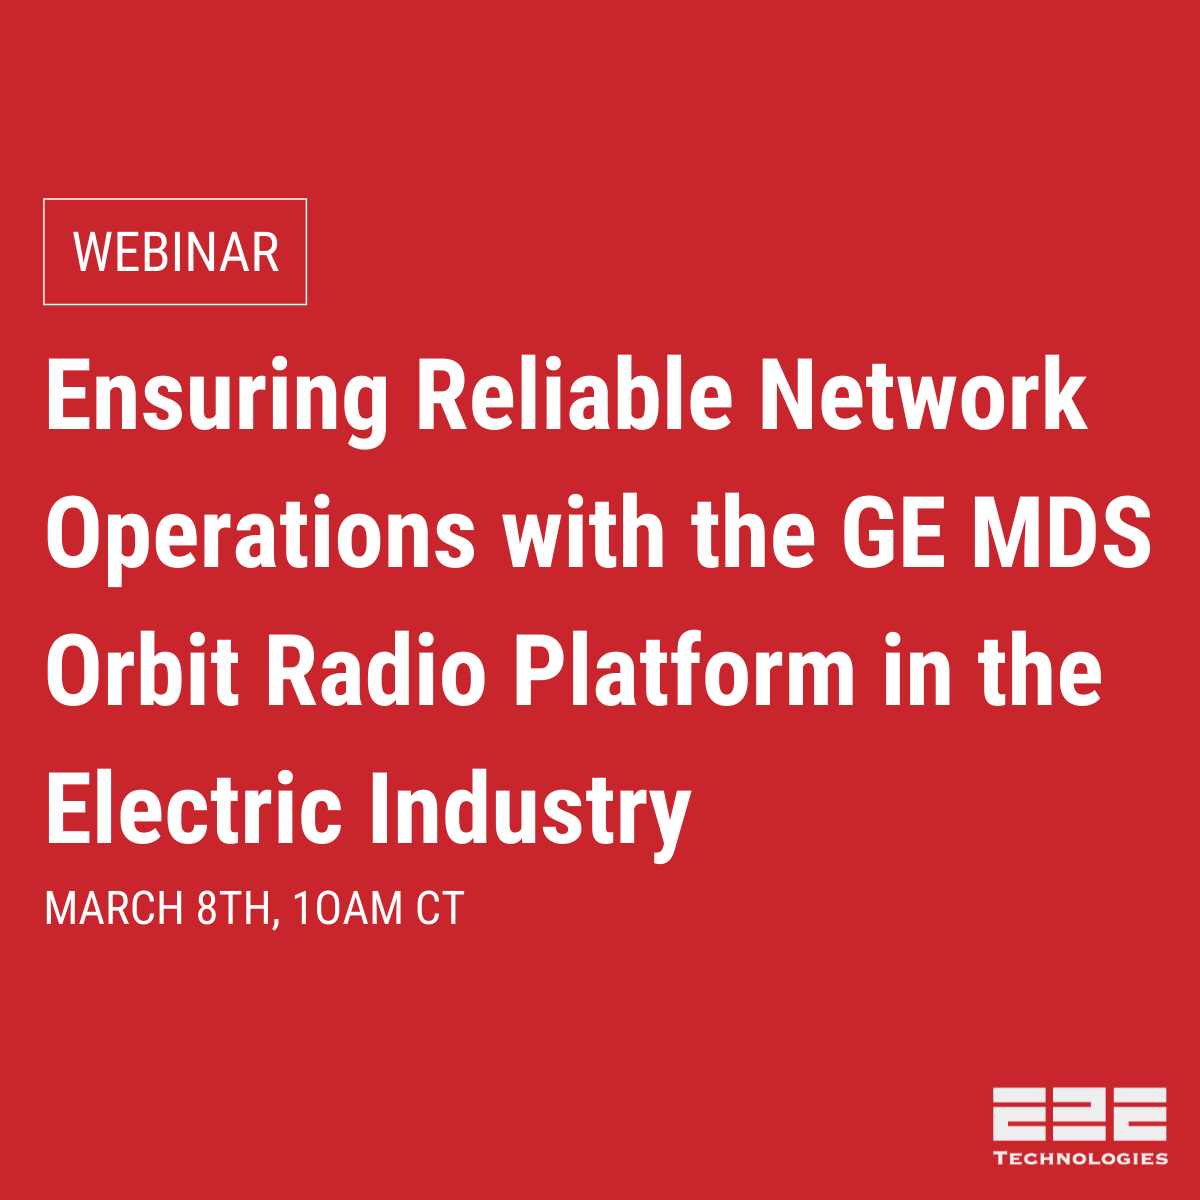 [Webinar] Ensuring Reliable Network Operations with the GE MDS Orbit Radio Platform in Electric